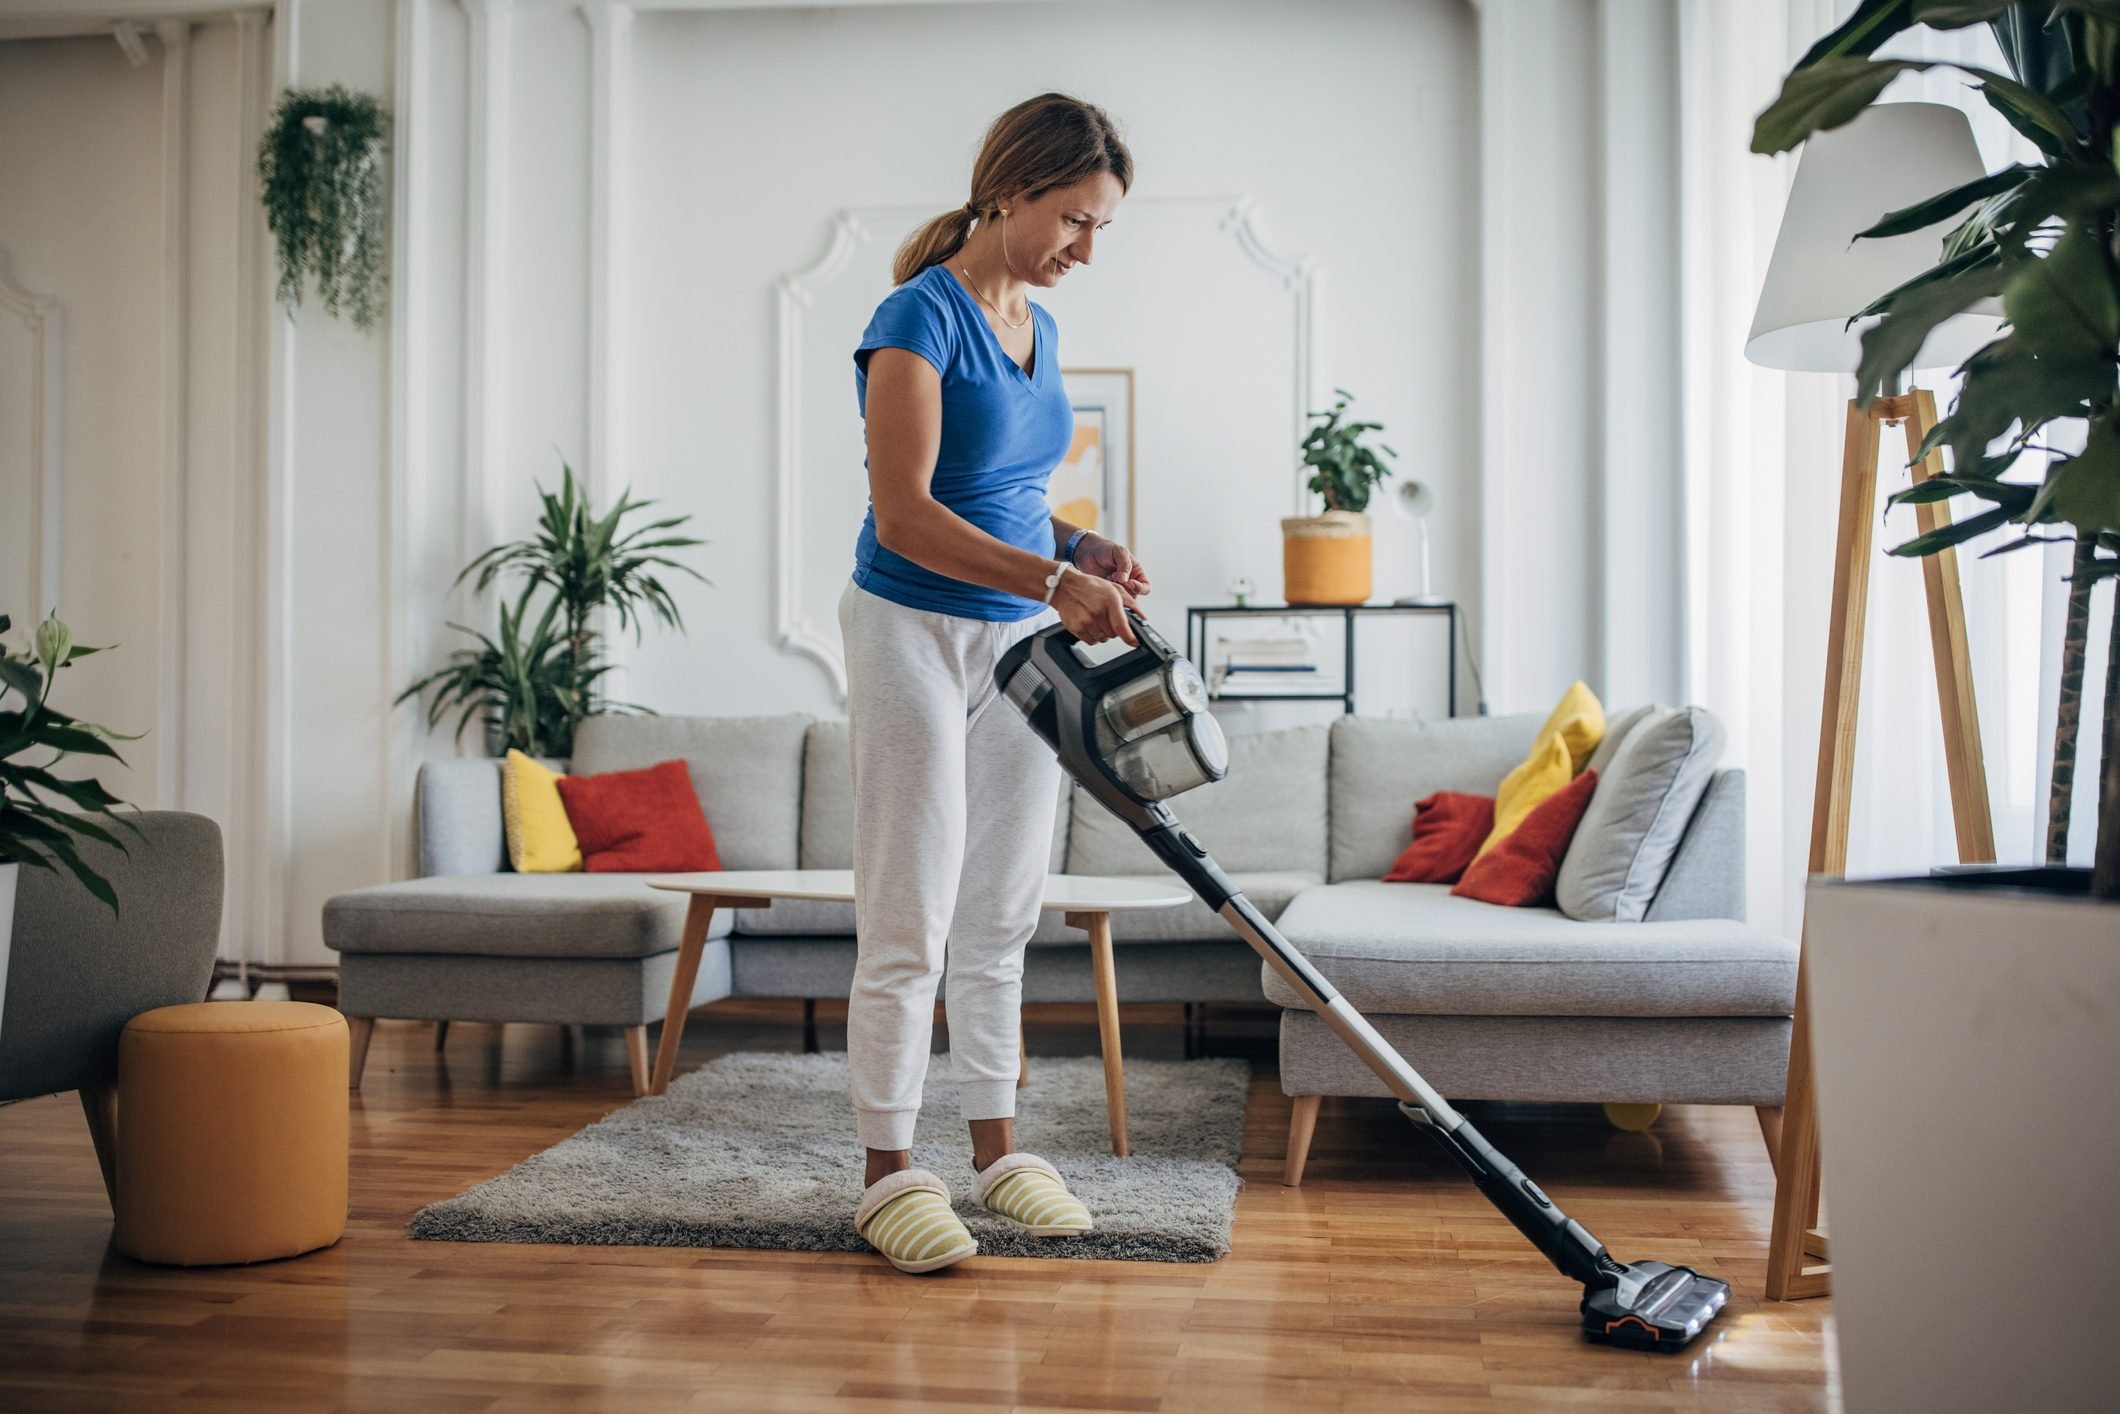 The Speed Cleaning Secret to a Guest-Ready Home